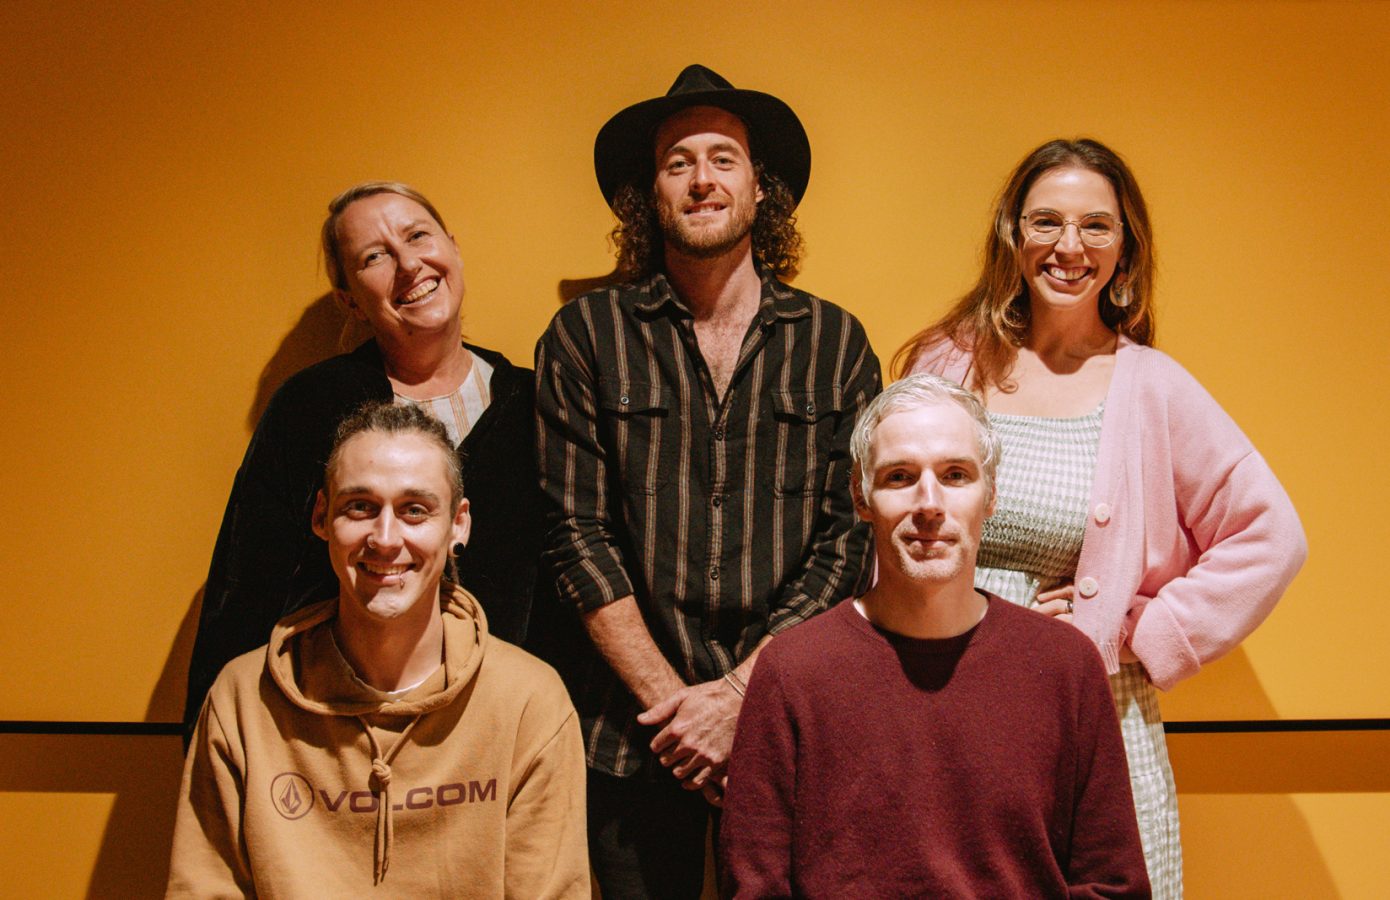 The five new 2023 regional MusicNSW team members photographed smiling with a yellow background.